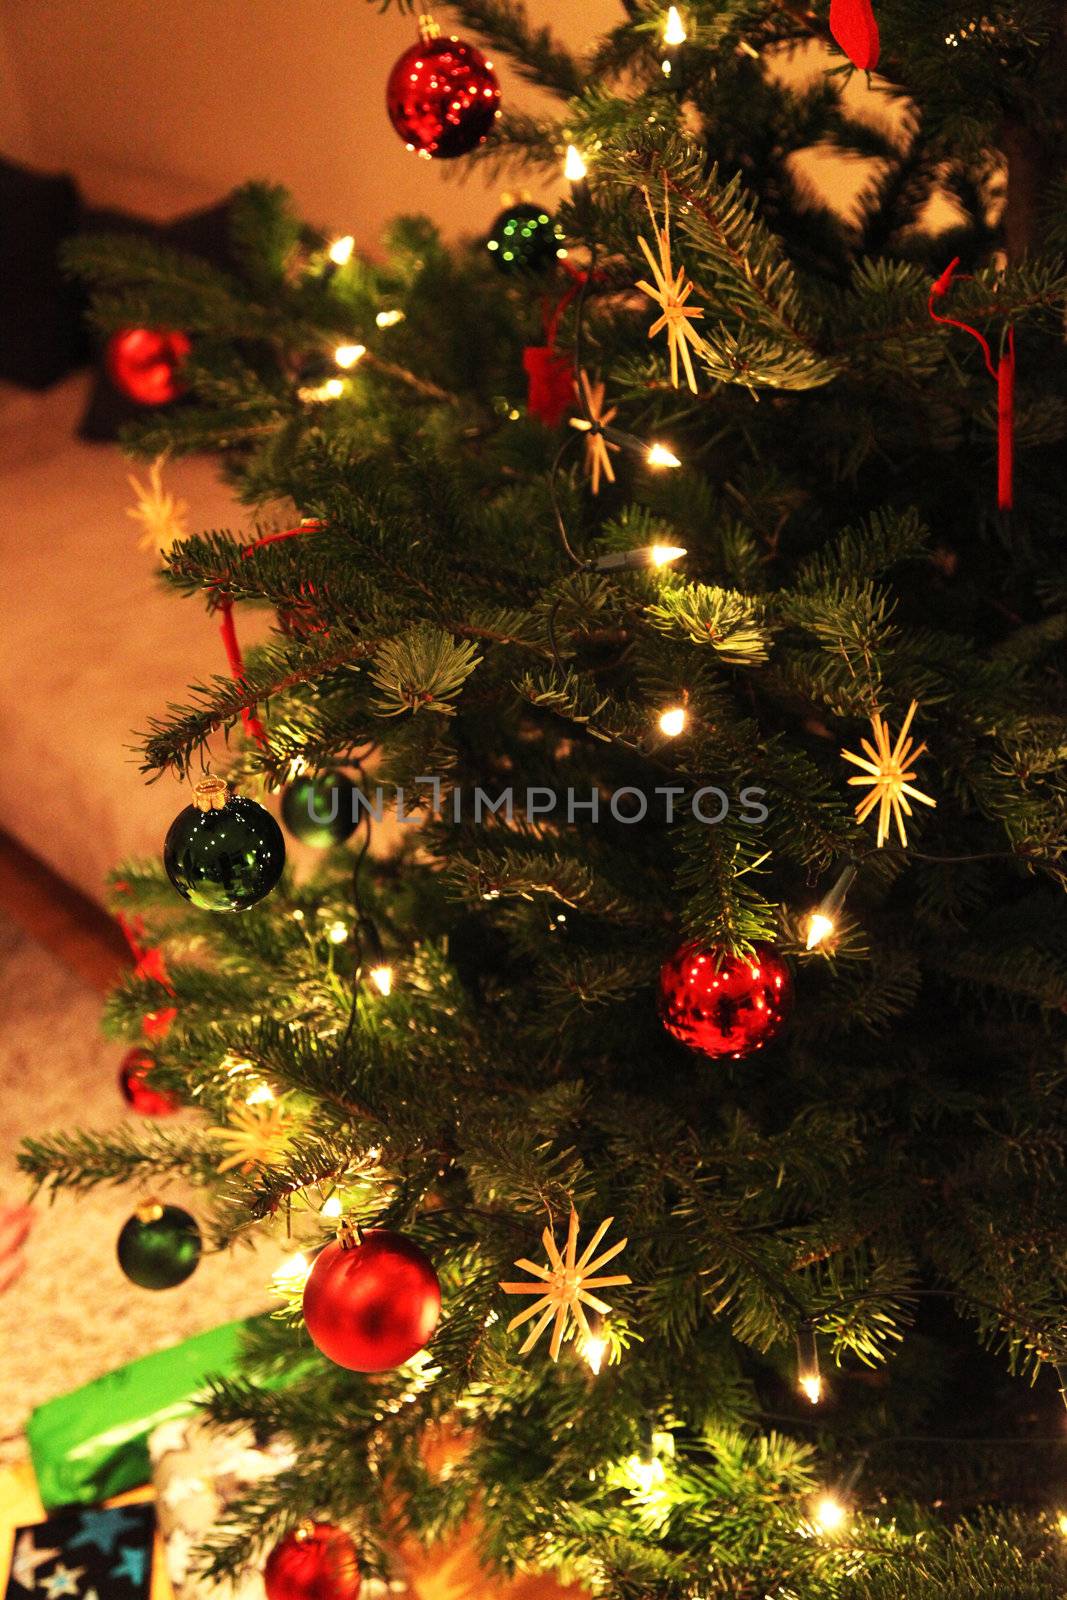 A festively decorated Christmas tree by Farina6000